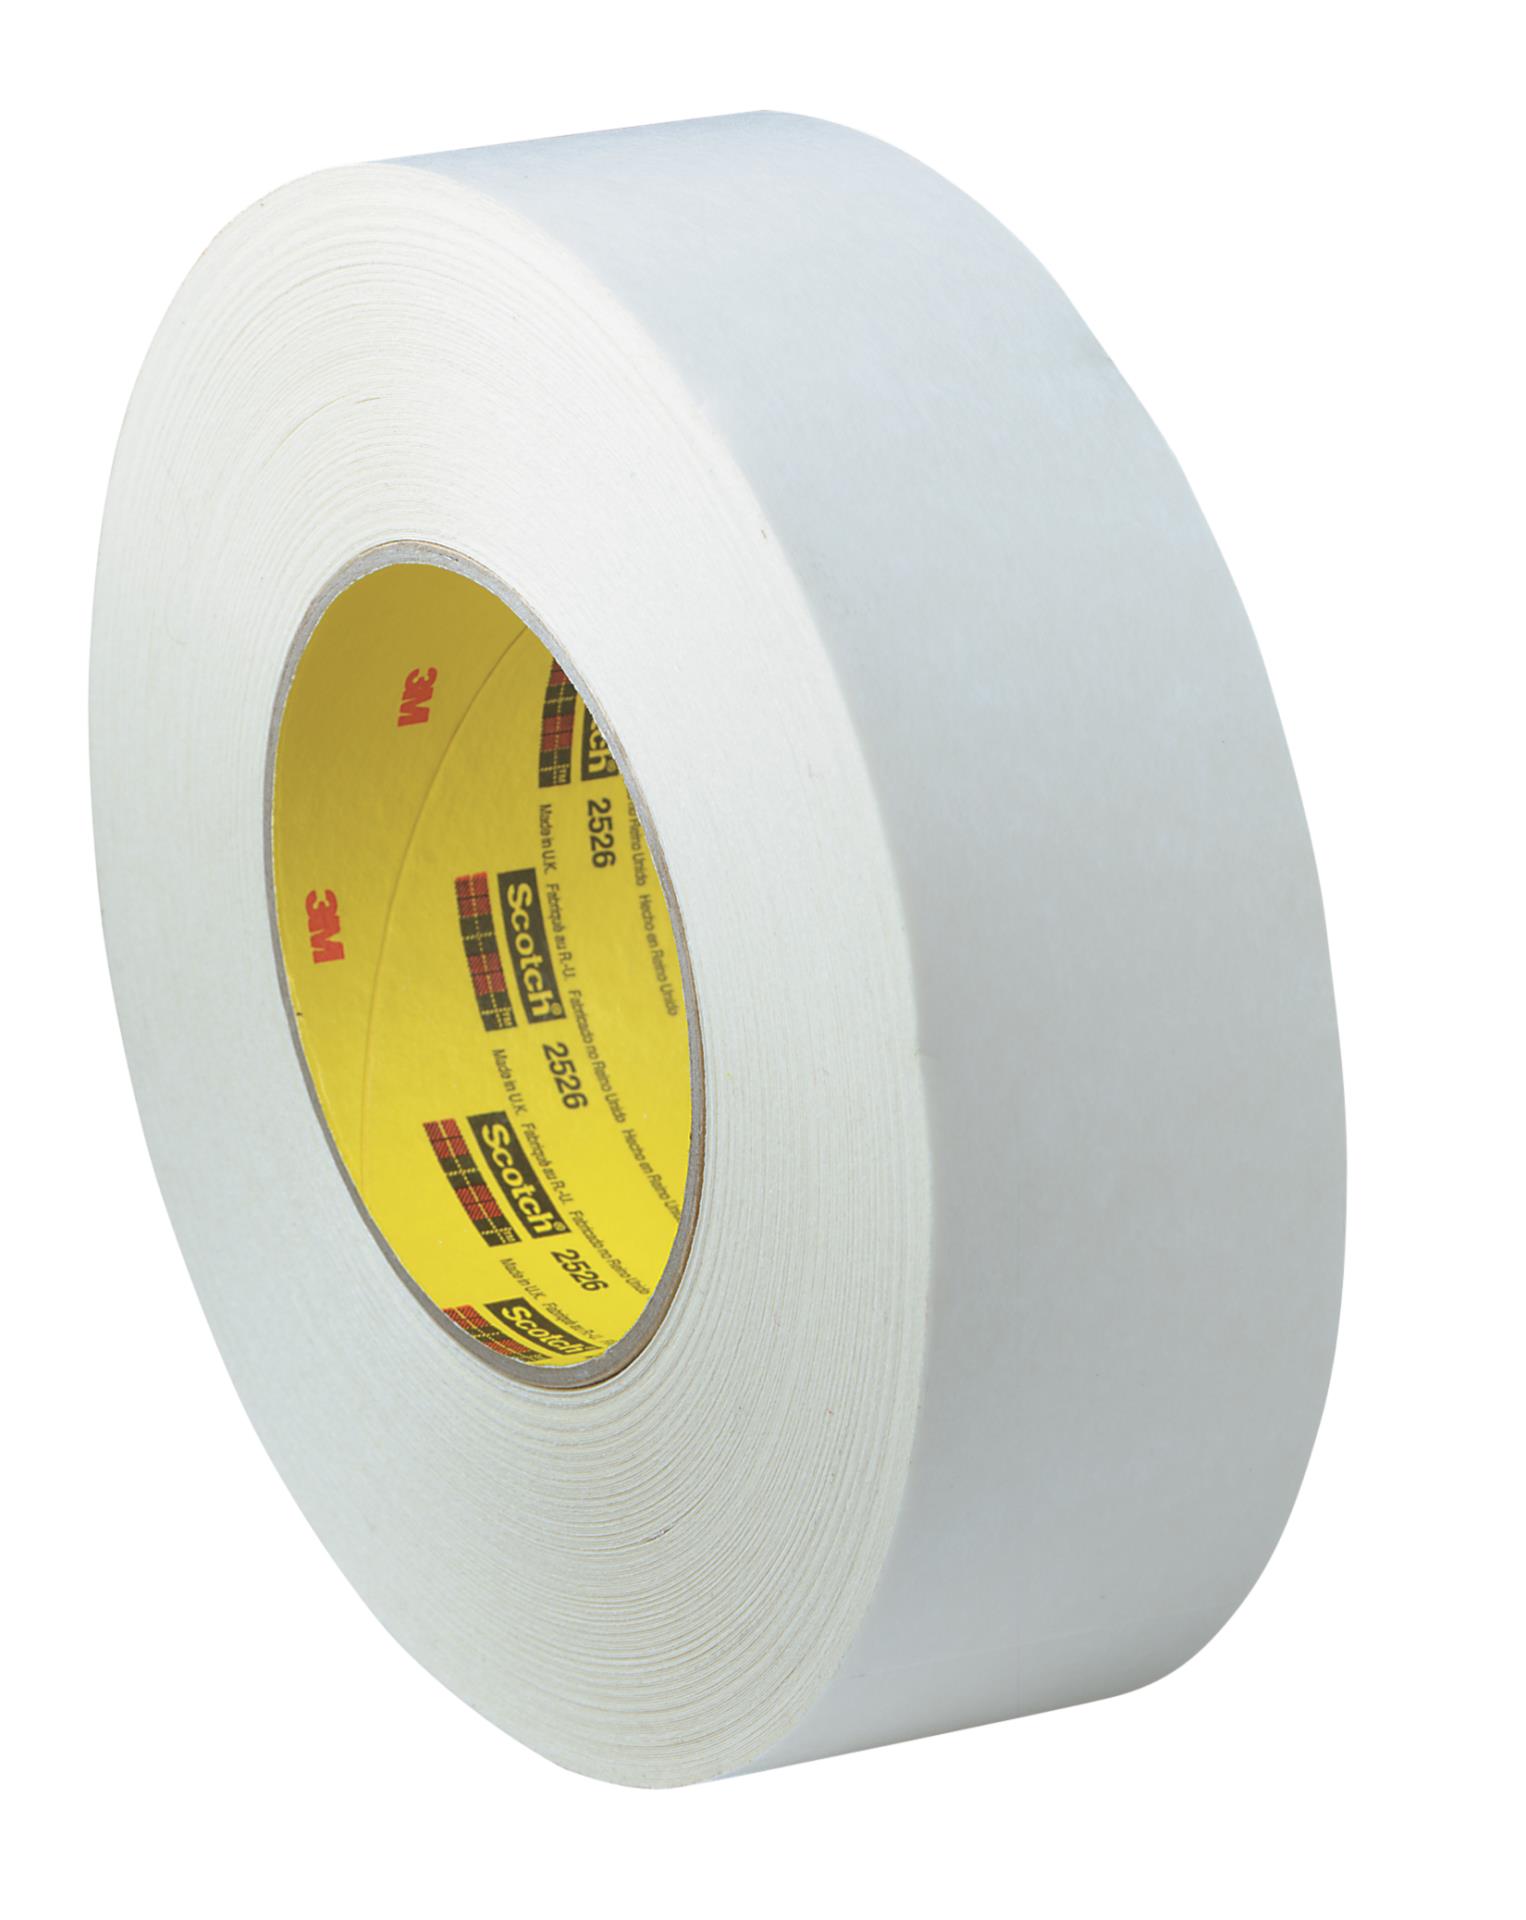 NEW! Poly Tape 48MM x 55M Yellow Polyethylene Backing Case of 24 ROLLS 